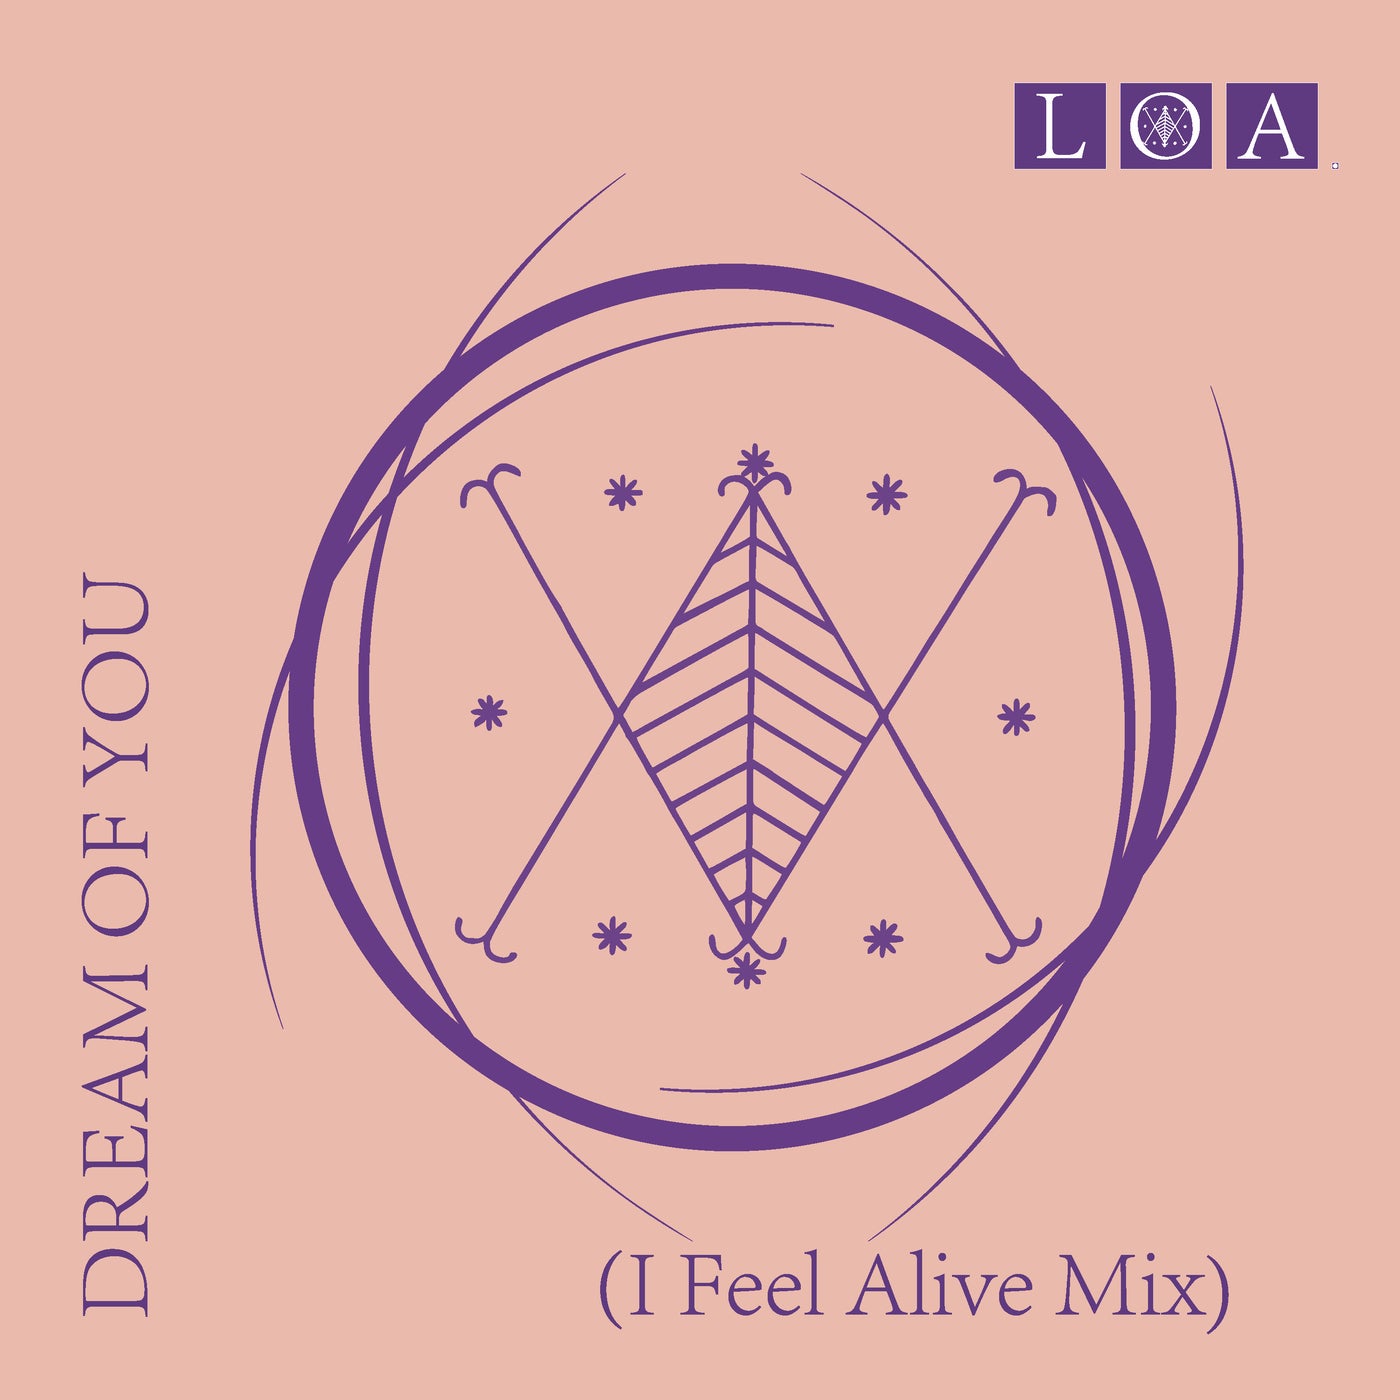 Dream of You (I Feel Alive Mix)